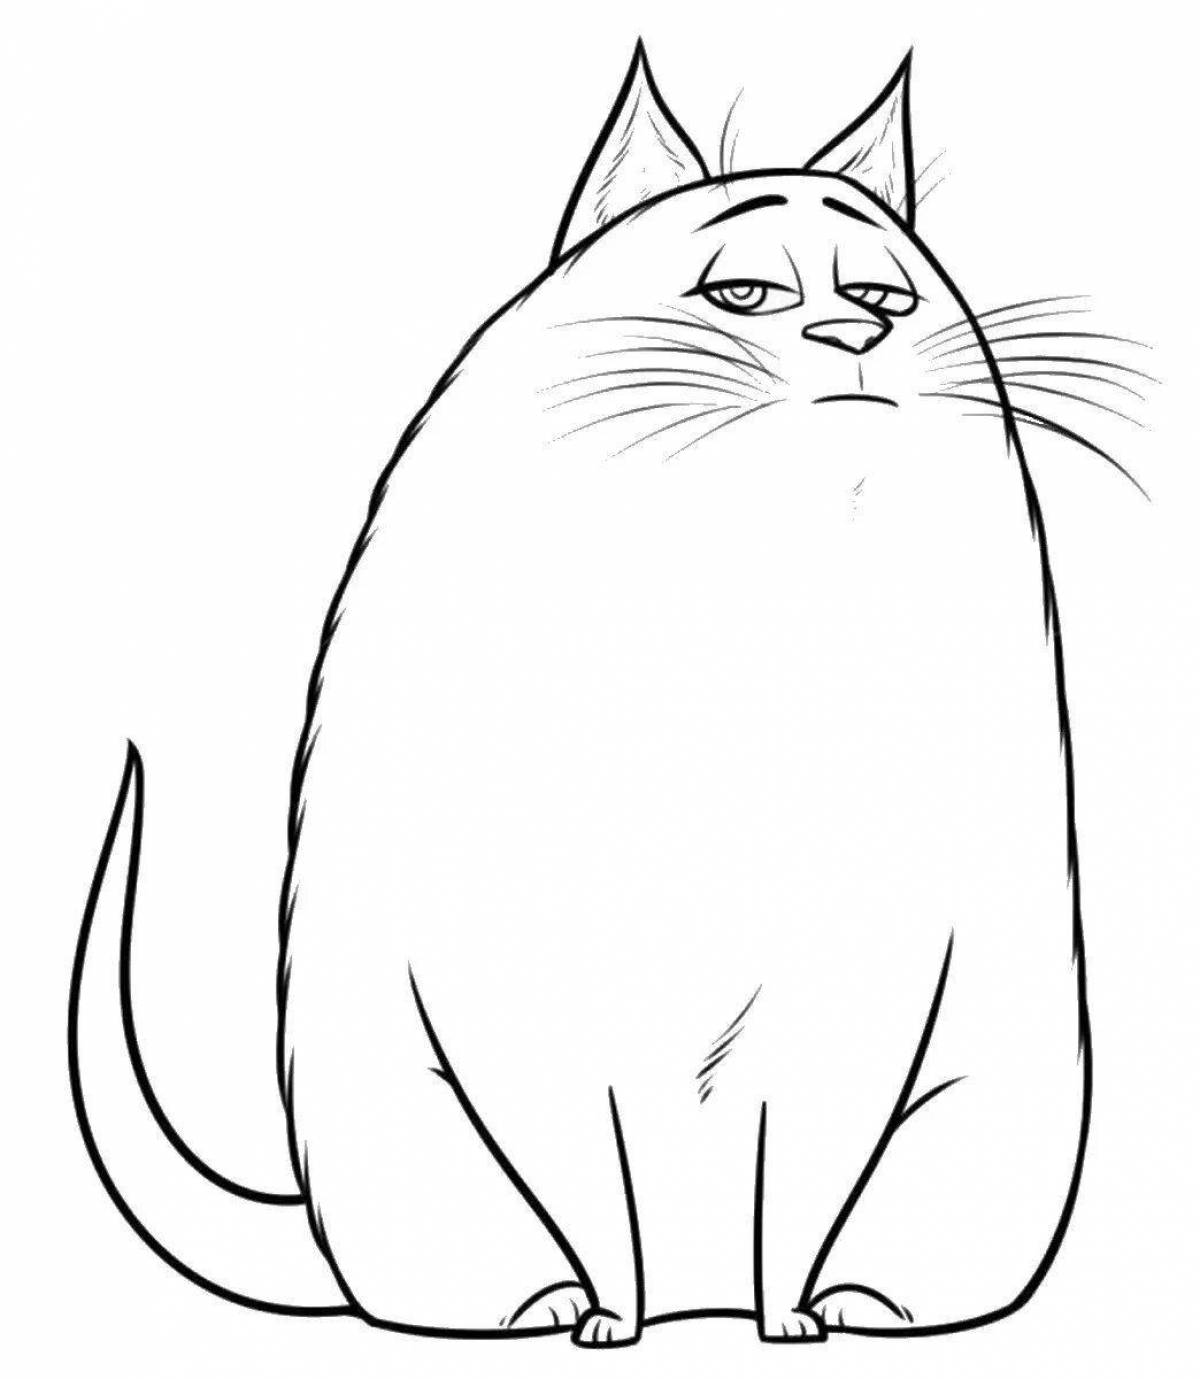 Colorful big cat coloring page